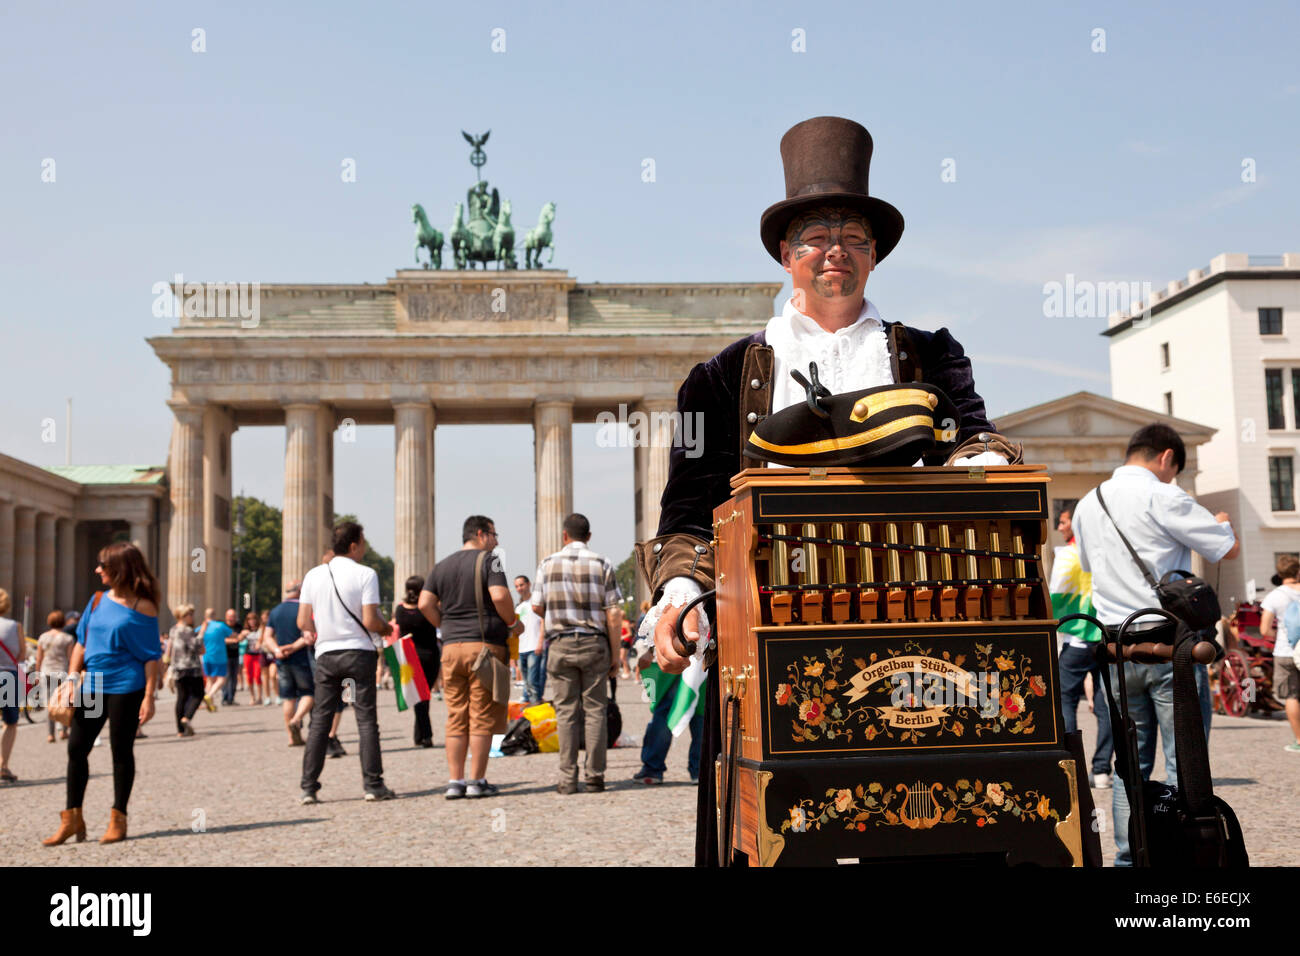 organ grinder with street organ and Top hat in front of the Brandenburg Gate in Berlin, Germany, Europe Stock Photo